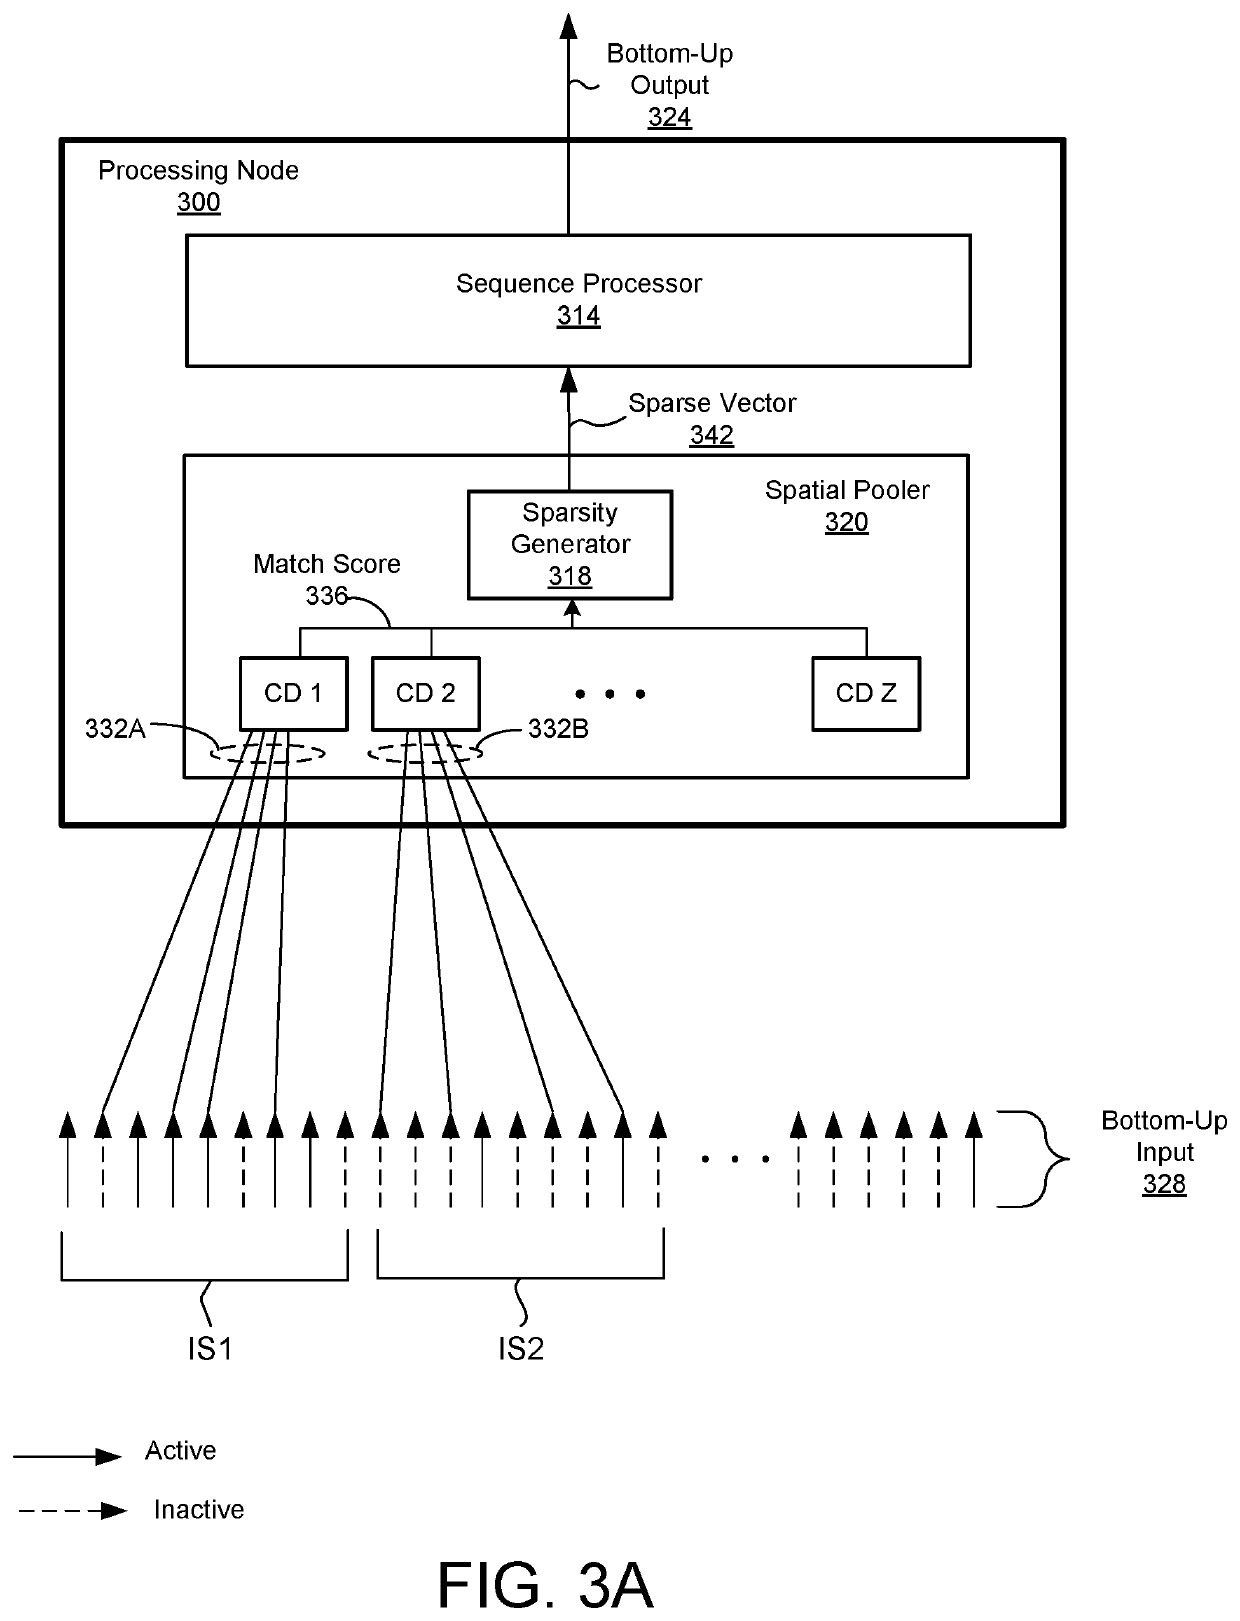 Sparse Distributed Representation for Networked Processing in Predictive System